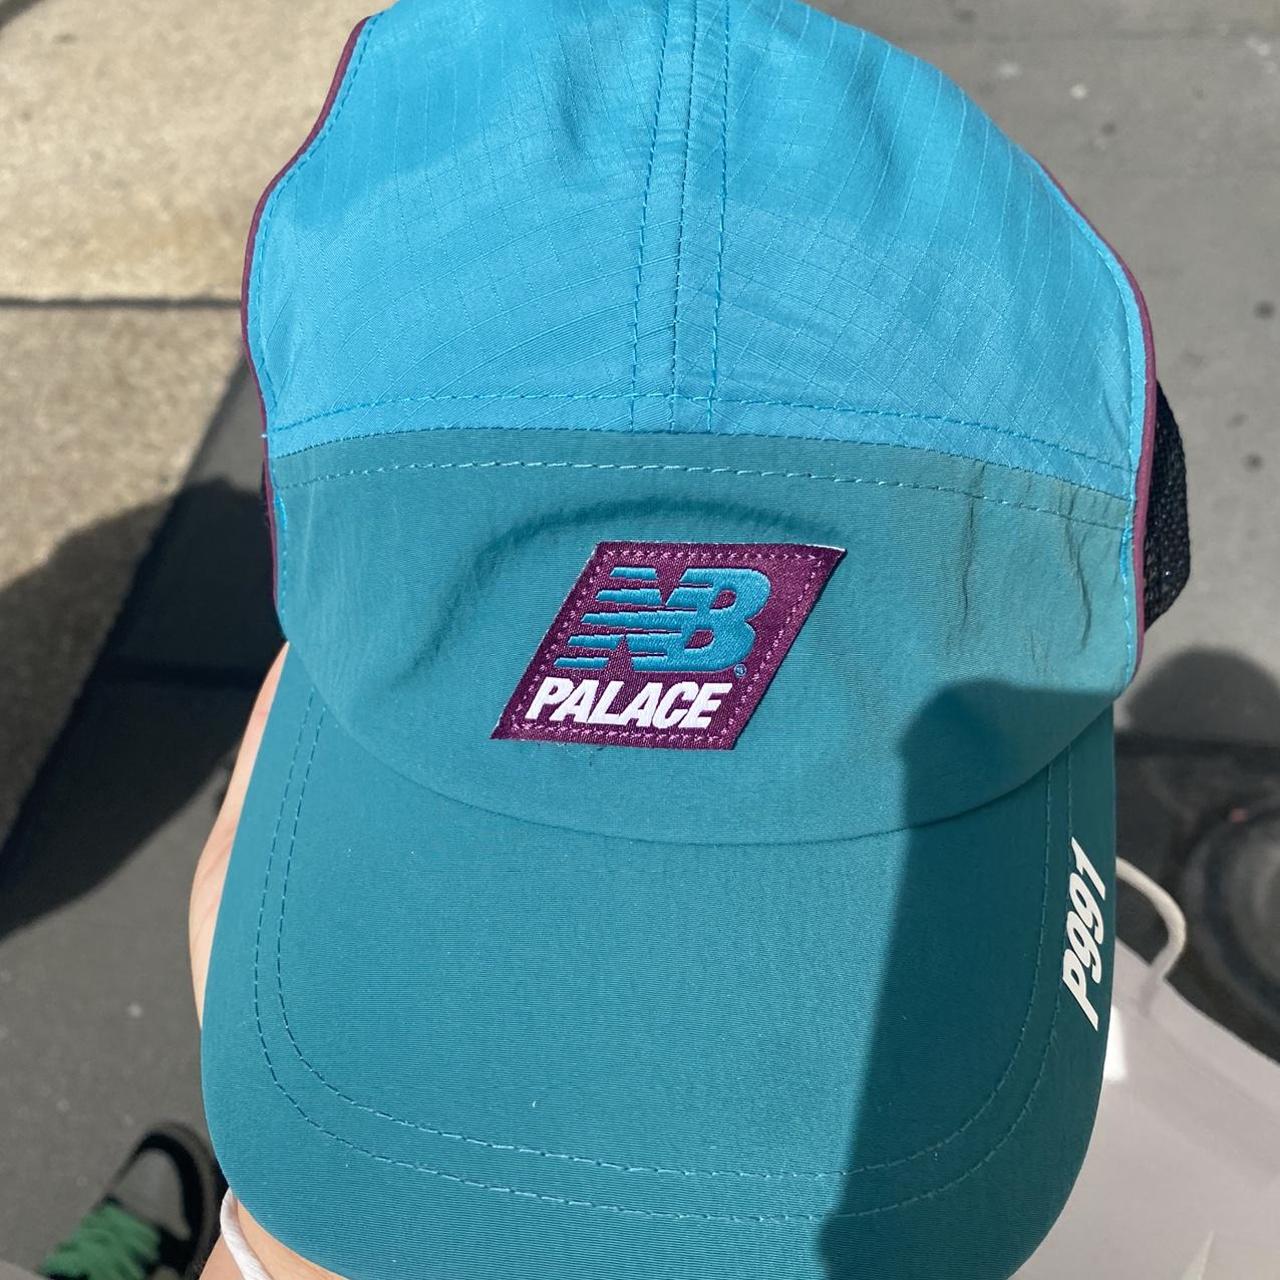 Palace x New Balance Cap Teal, Brand New , In Hand...